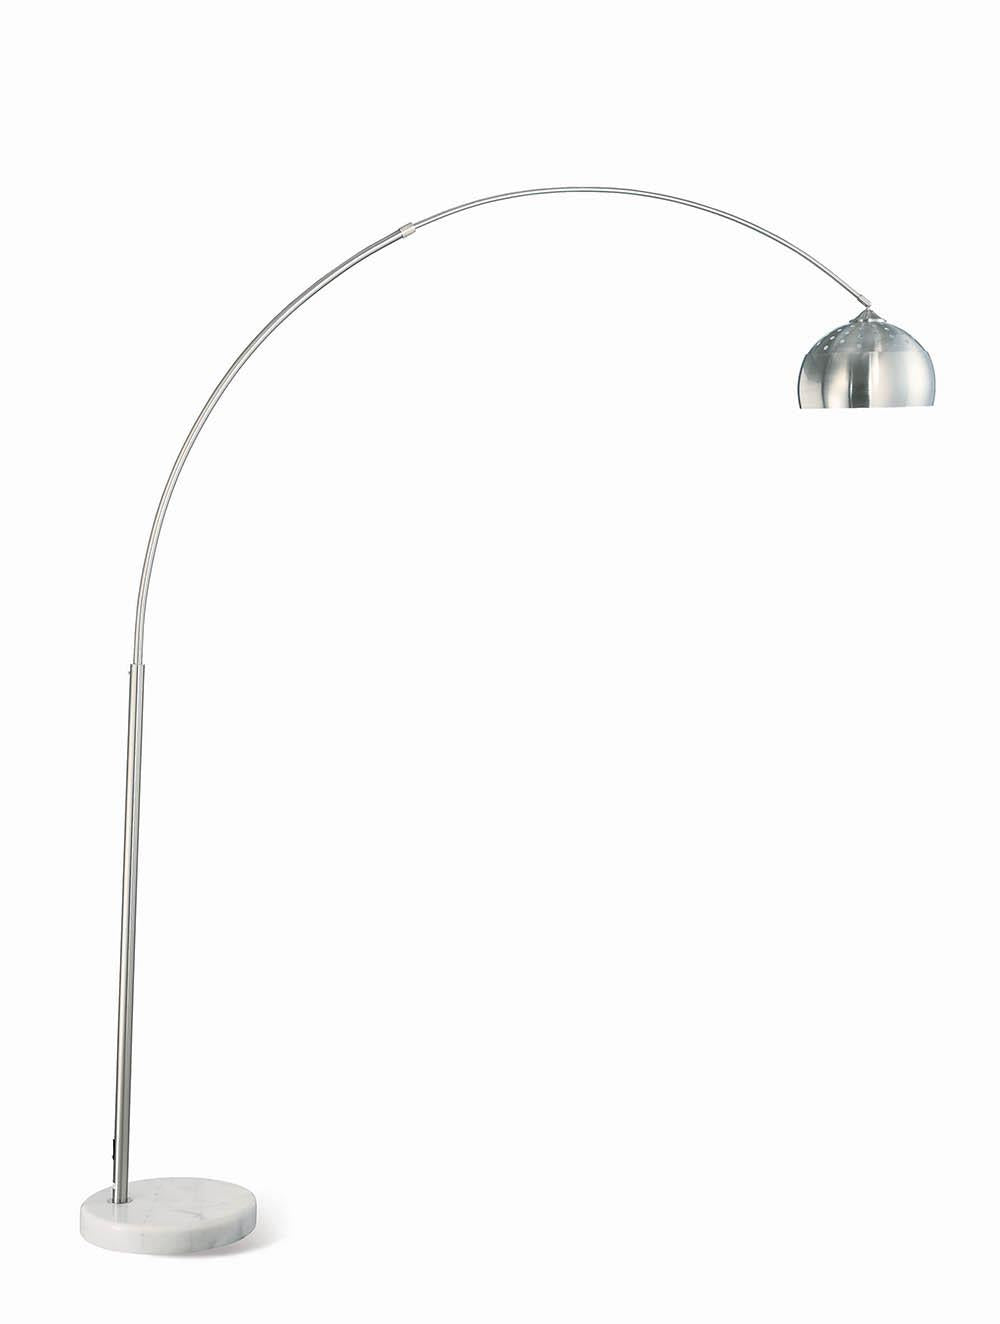 Krester Arched Floor Lamp Brushed Steel and Chrome  Las Vegas Furniture Stores